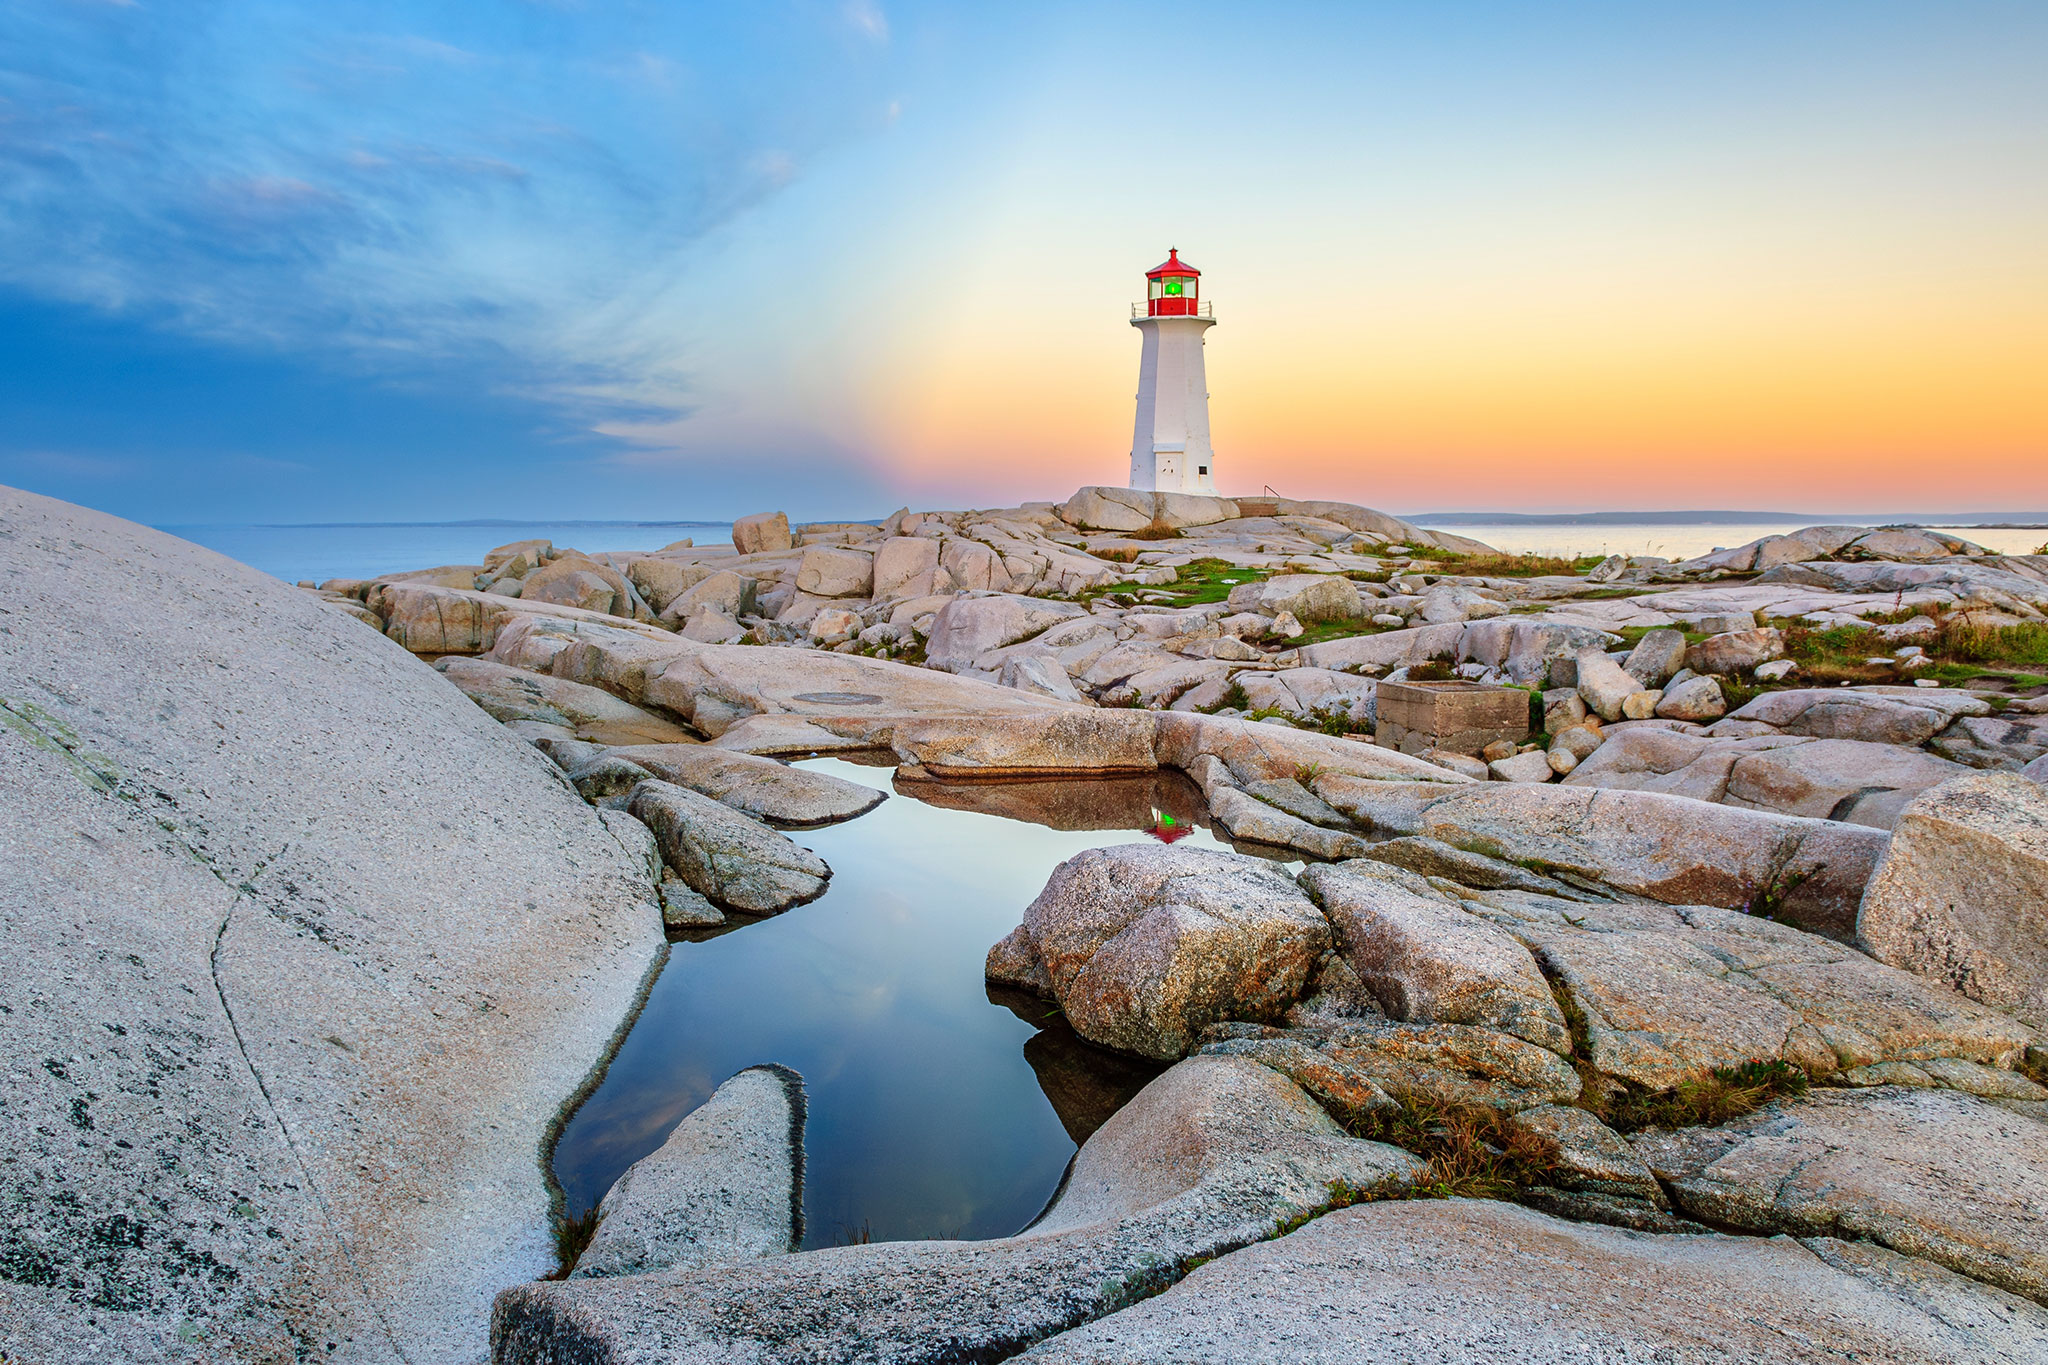 A lighthouse with a white body and red top sits near the ocean’s edge at sunset, with various-sized rocks and small pools of water leading the path toward it.